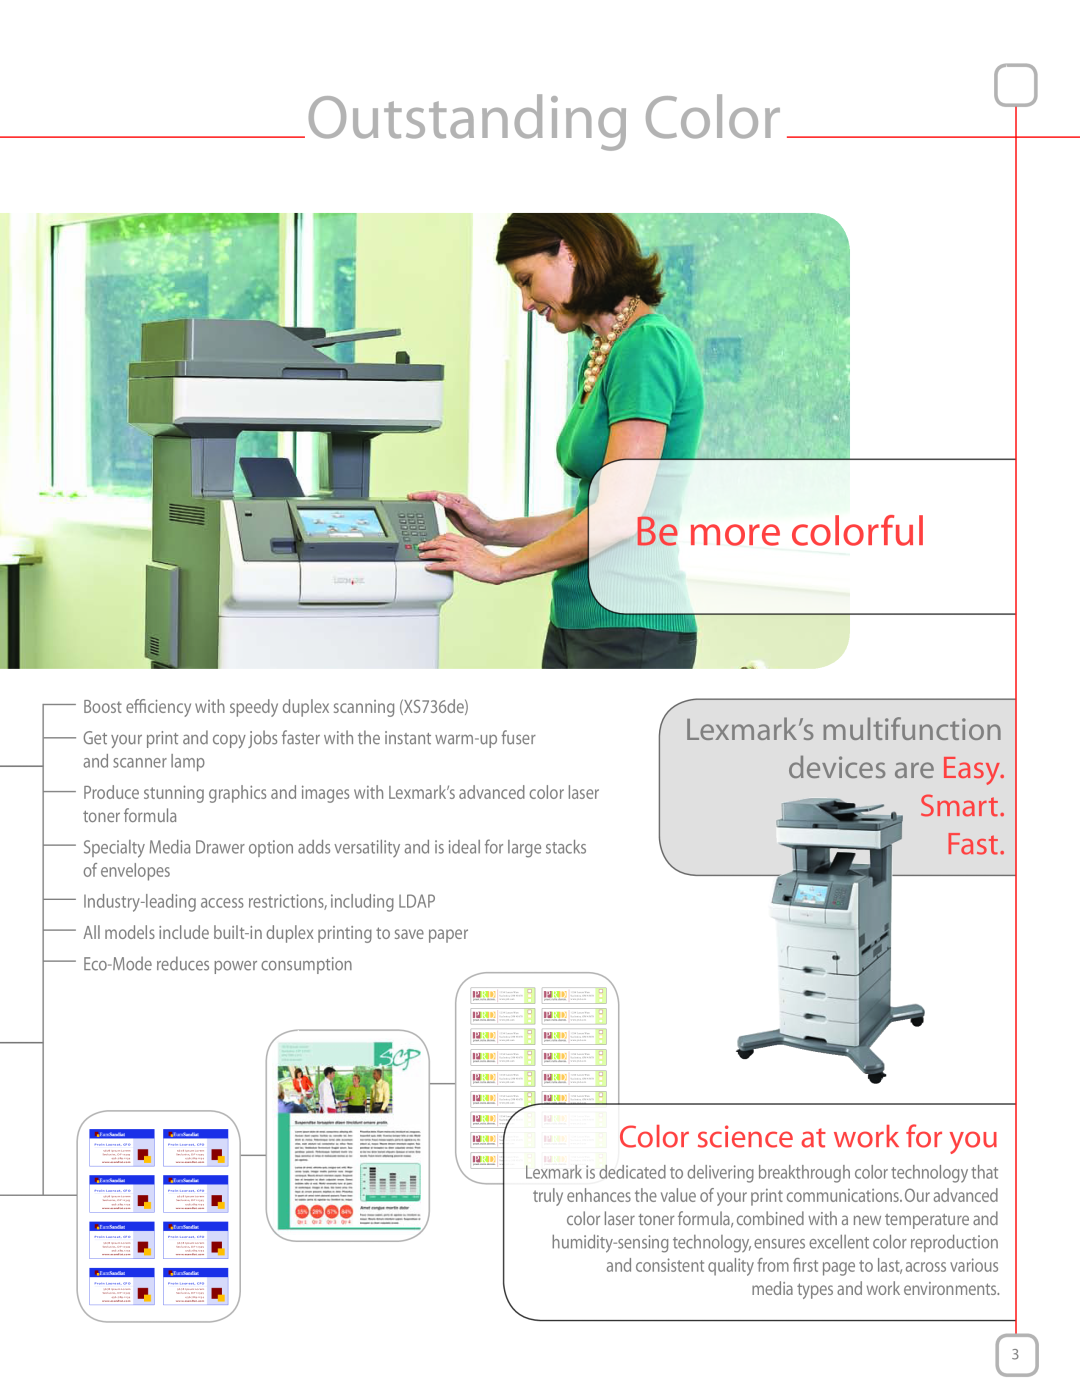 Lexmark XS736de manual Outstanding Color, Be more colorful, Smart Fast, Color science at work for you, Proin Laoreet, CFO 